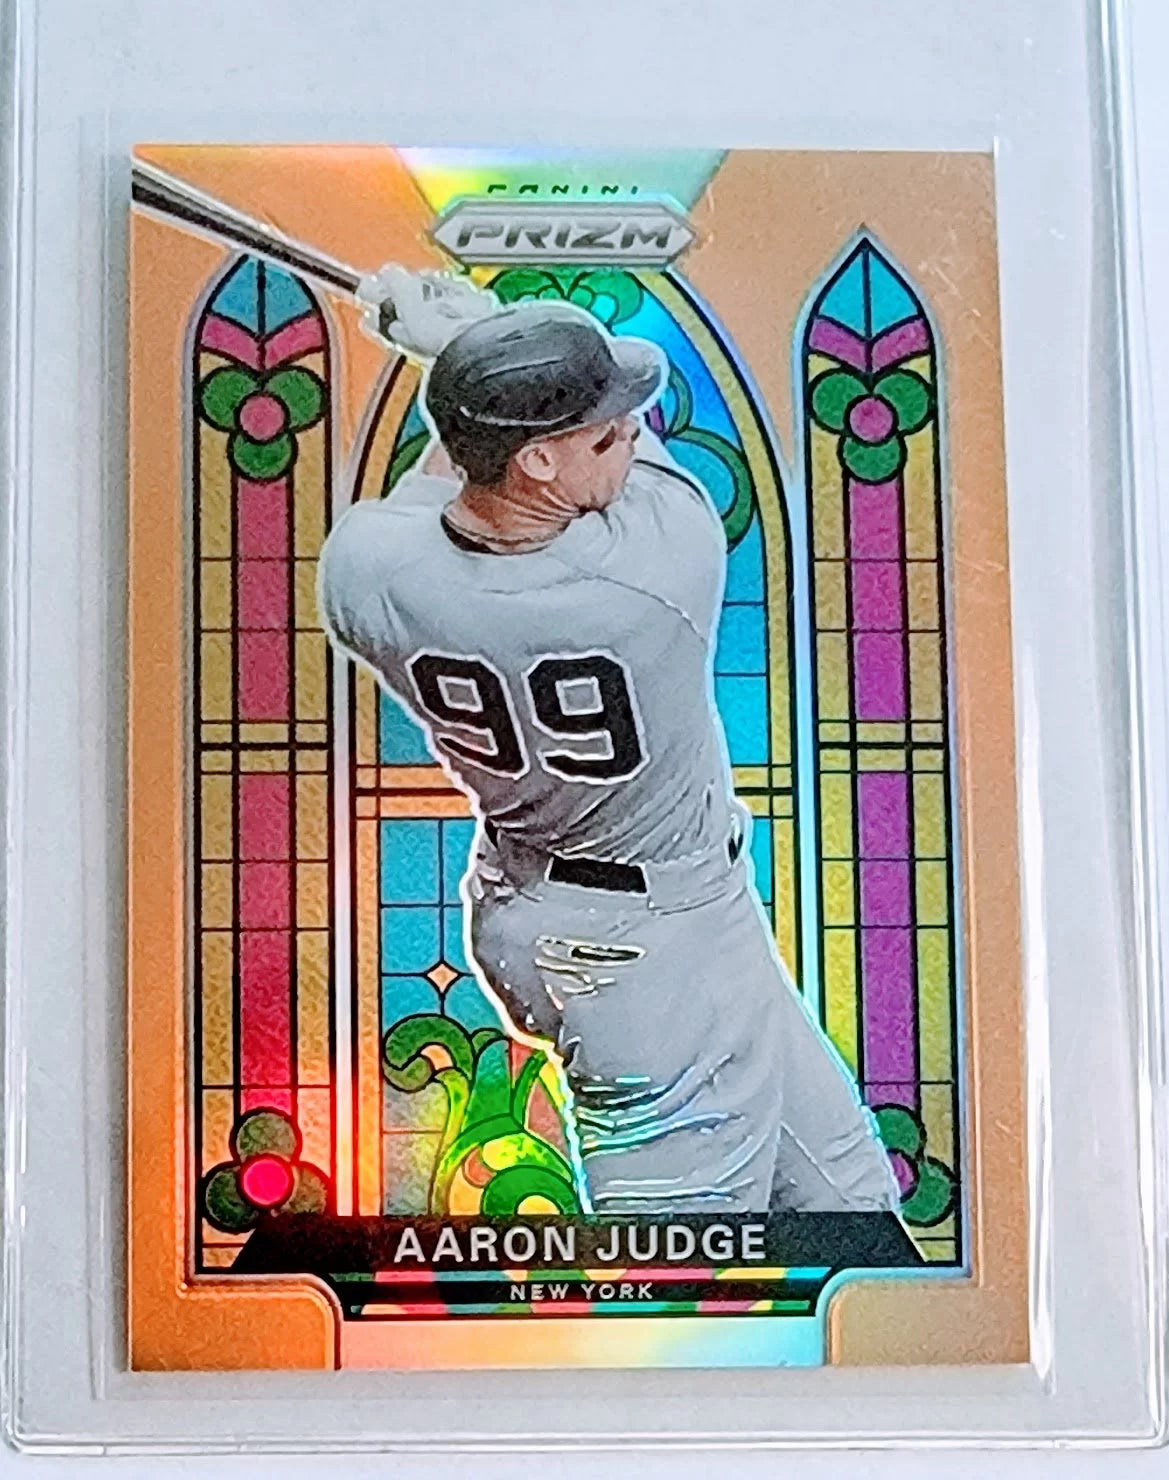 2019 Panini Prizm Aaron Judge Stained Glass Gold #'d/100 Refractor Baseball Card TPTV ~Grading Pending simple Xclusive Collectibles   